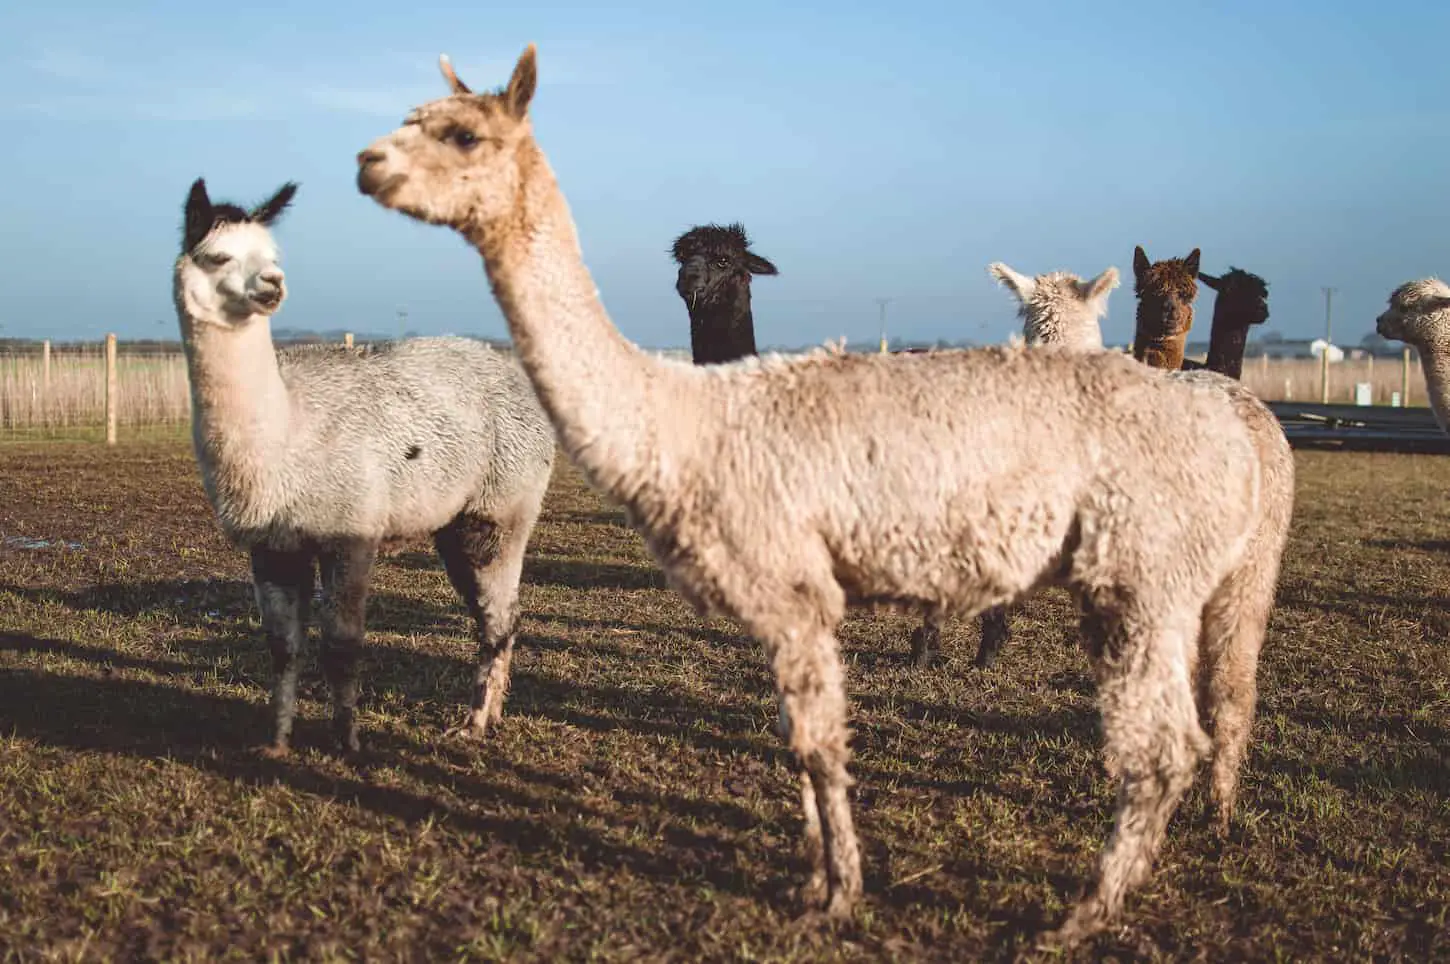 An image of llamas in a field on a sunny day.